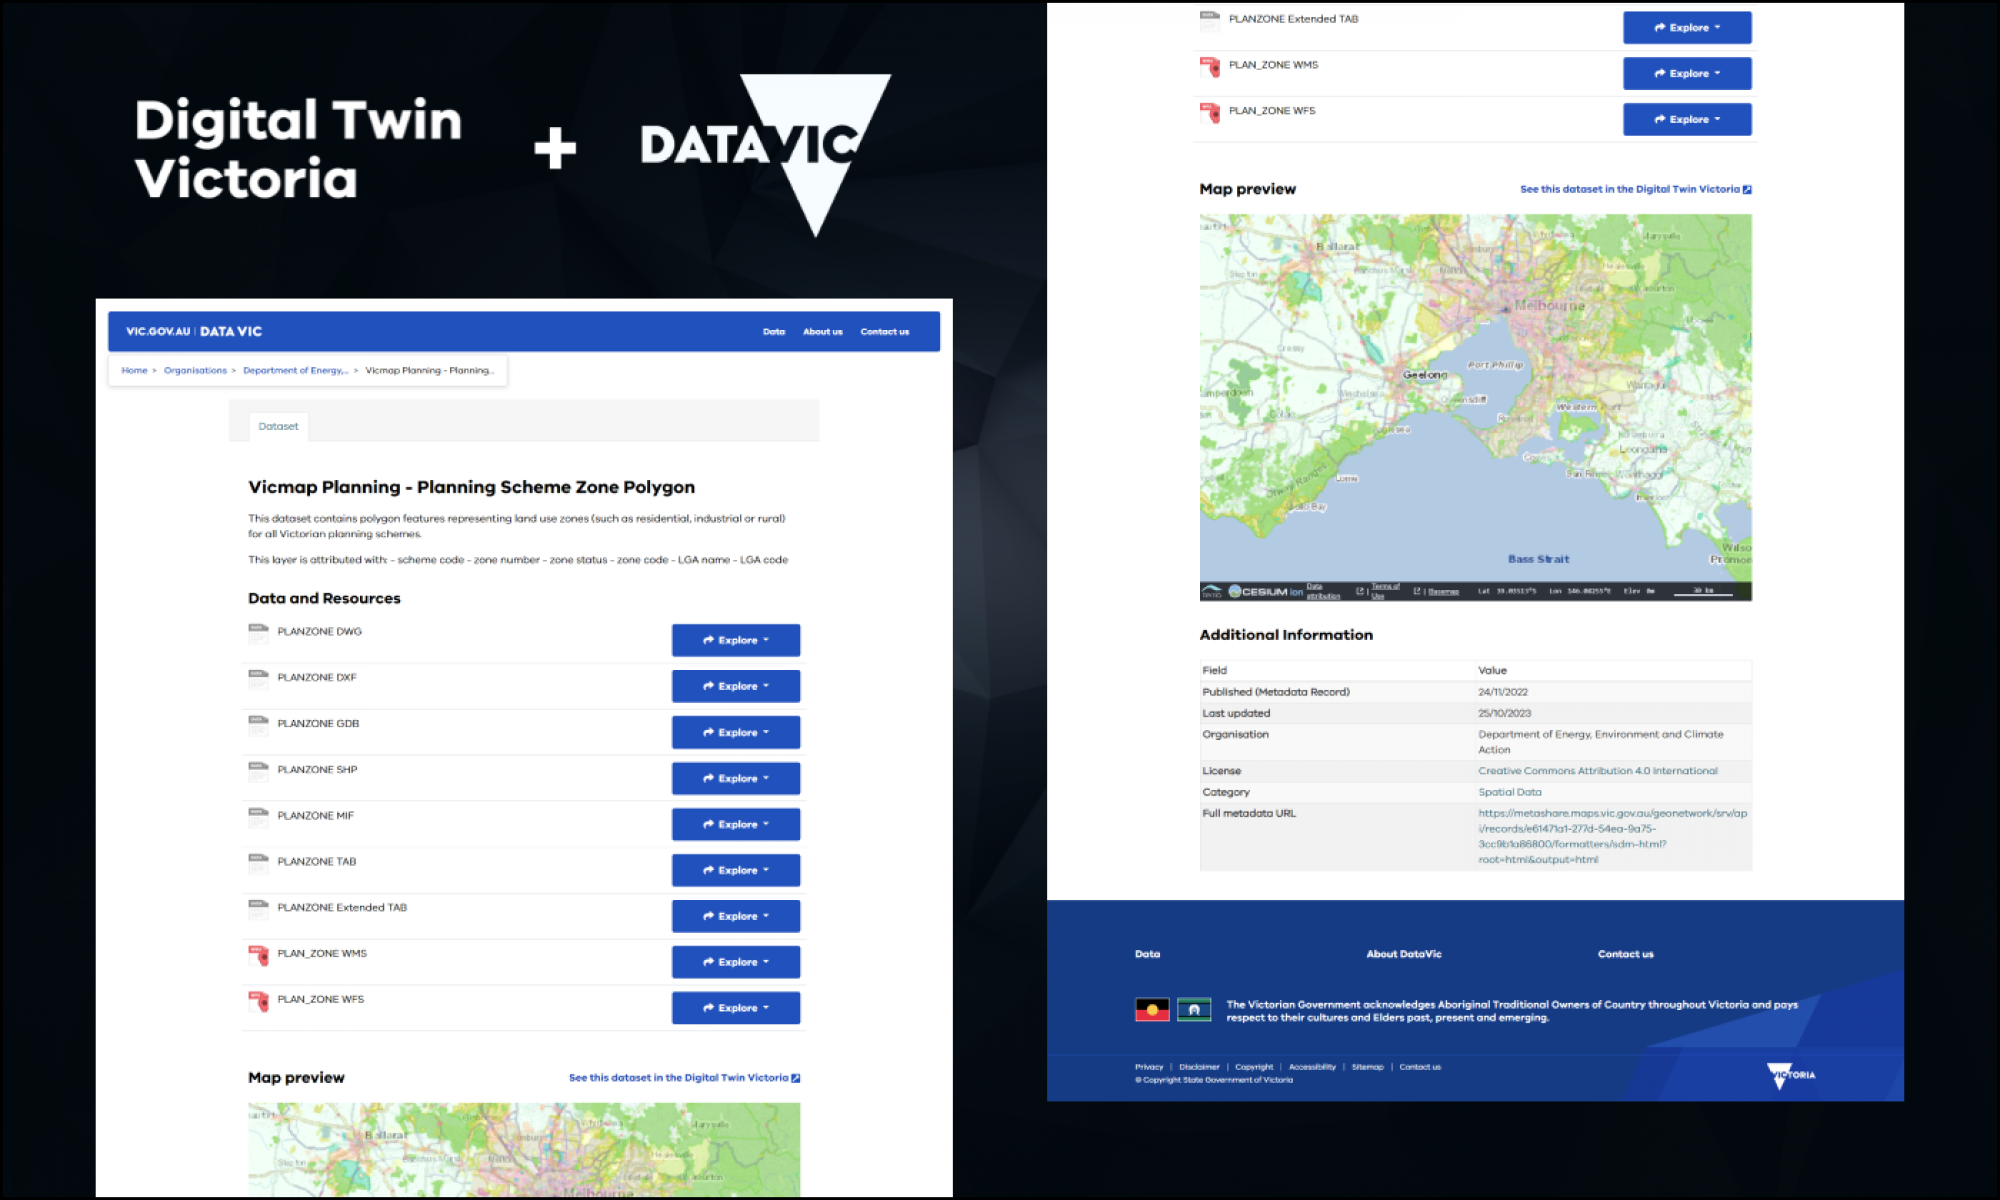 A black background with two halves of a web page overlayed over the top. The right hand side shows the top half of a DataVic product page displaying the Vicmap Planning Scheme Zone Polygon with a list of Data and resource files and their download links. The right hand side shows the second half of the web page featuring a Map preview of the data which is centred over Melbourne and Port Phillip, with a table at the very bottom listing technical details about the data.